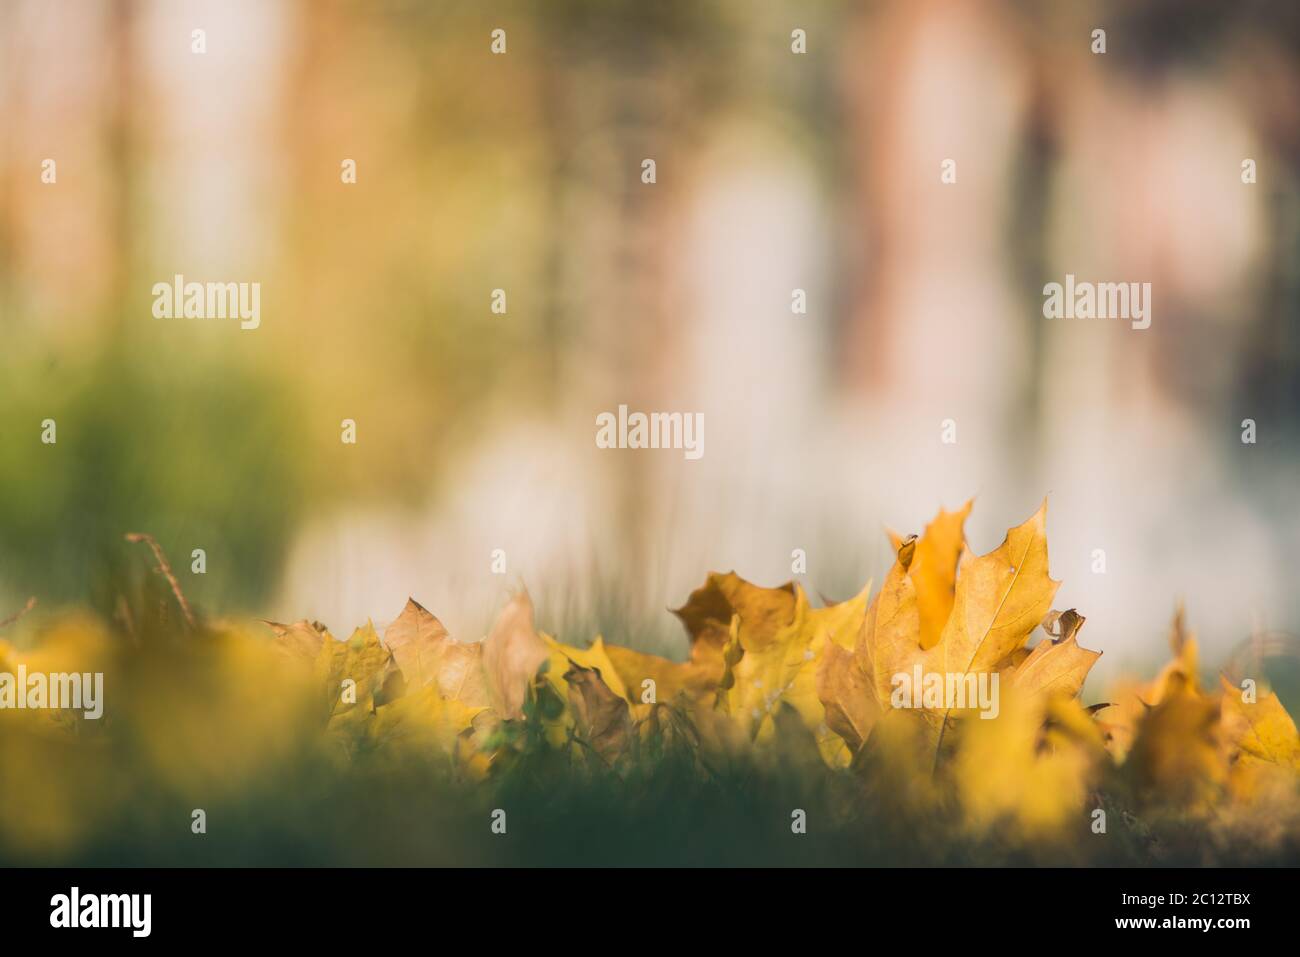 Yellow autumn Maple leaves on green grass. Bokeh blurred artistic background Stock Photo